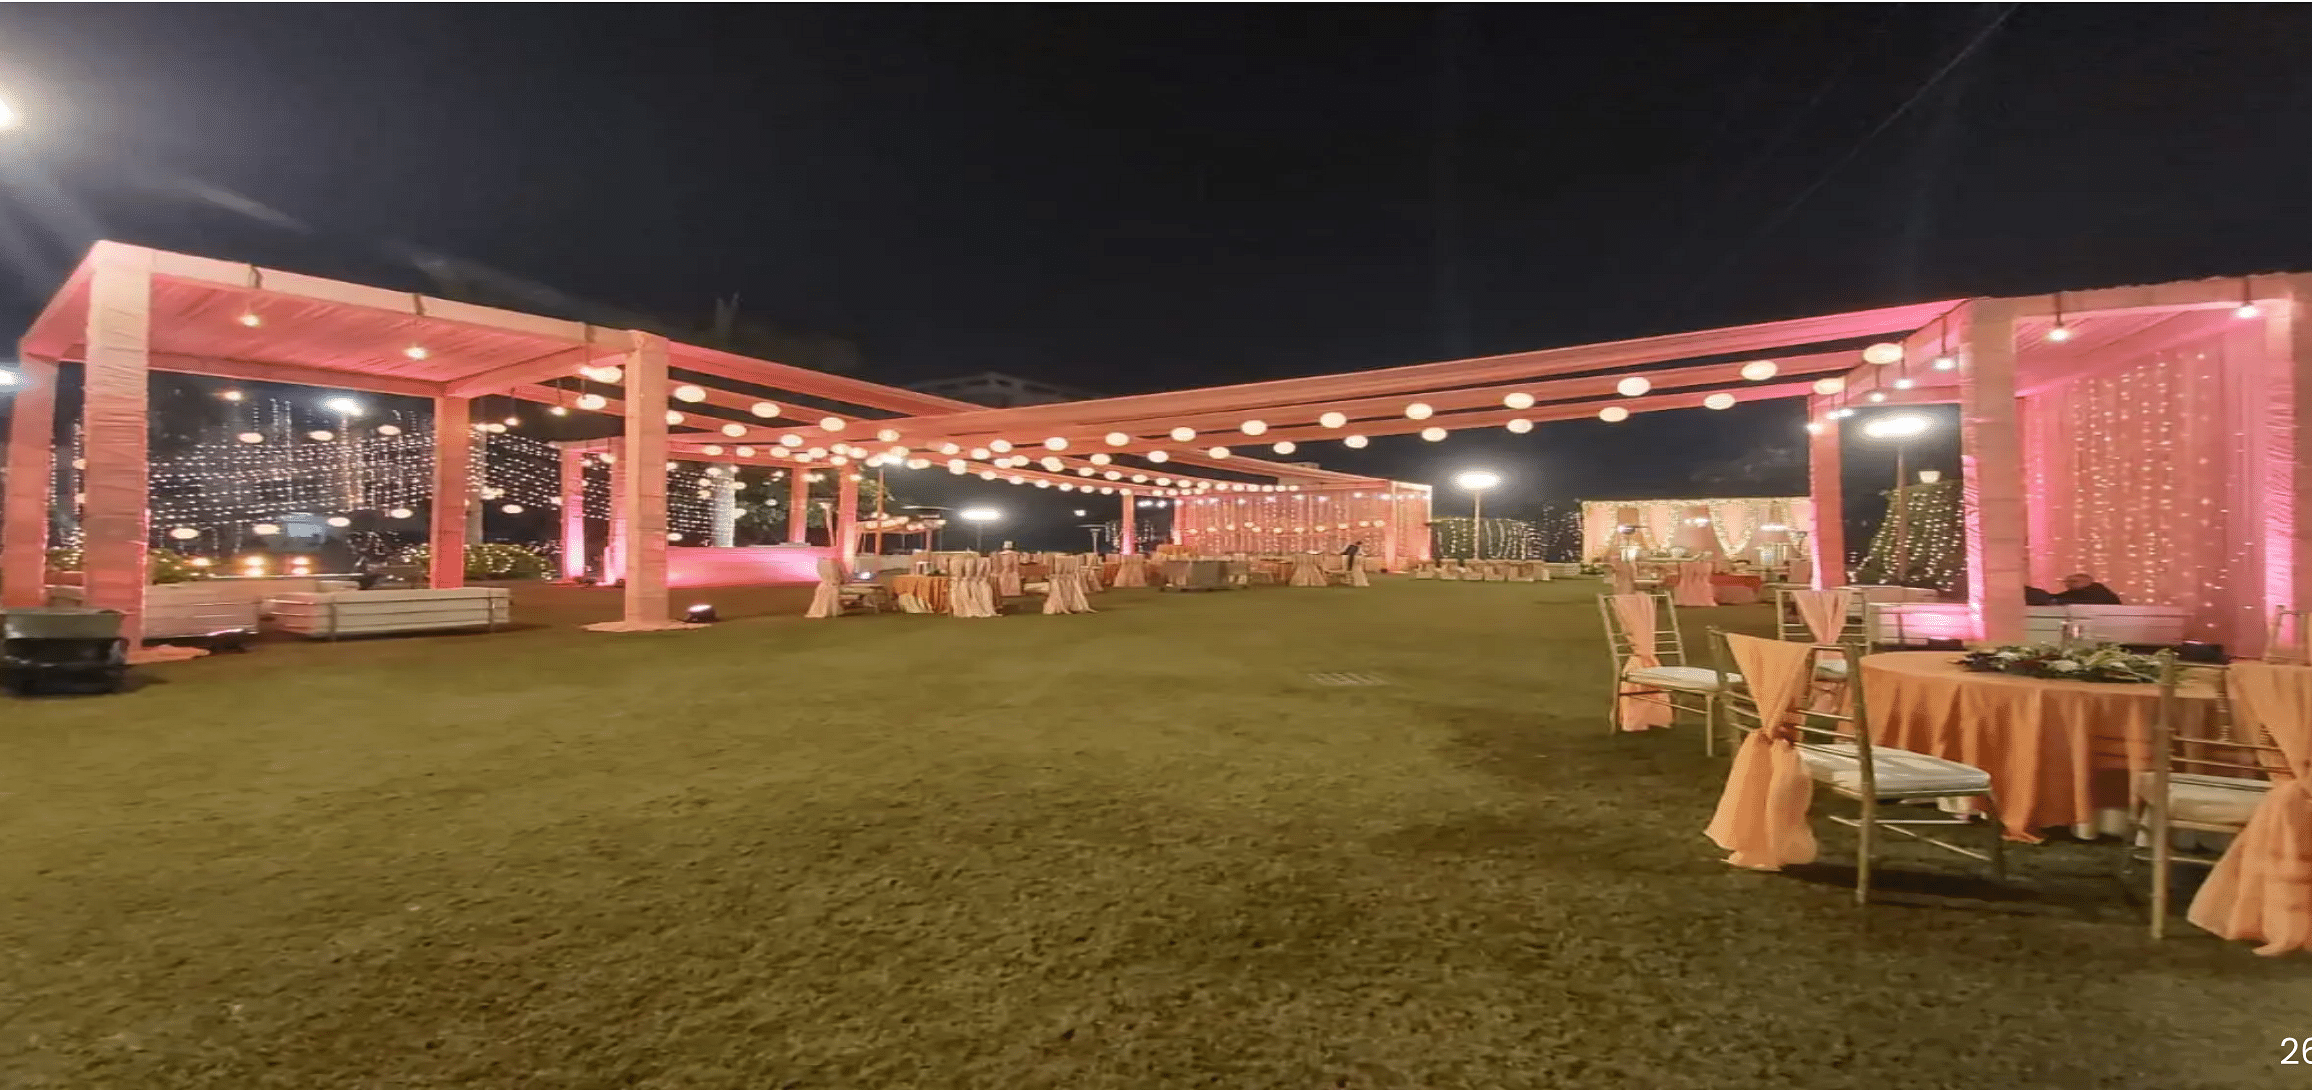 South Patio in South City 2, Gurgaon